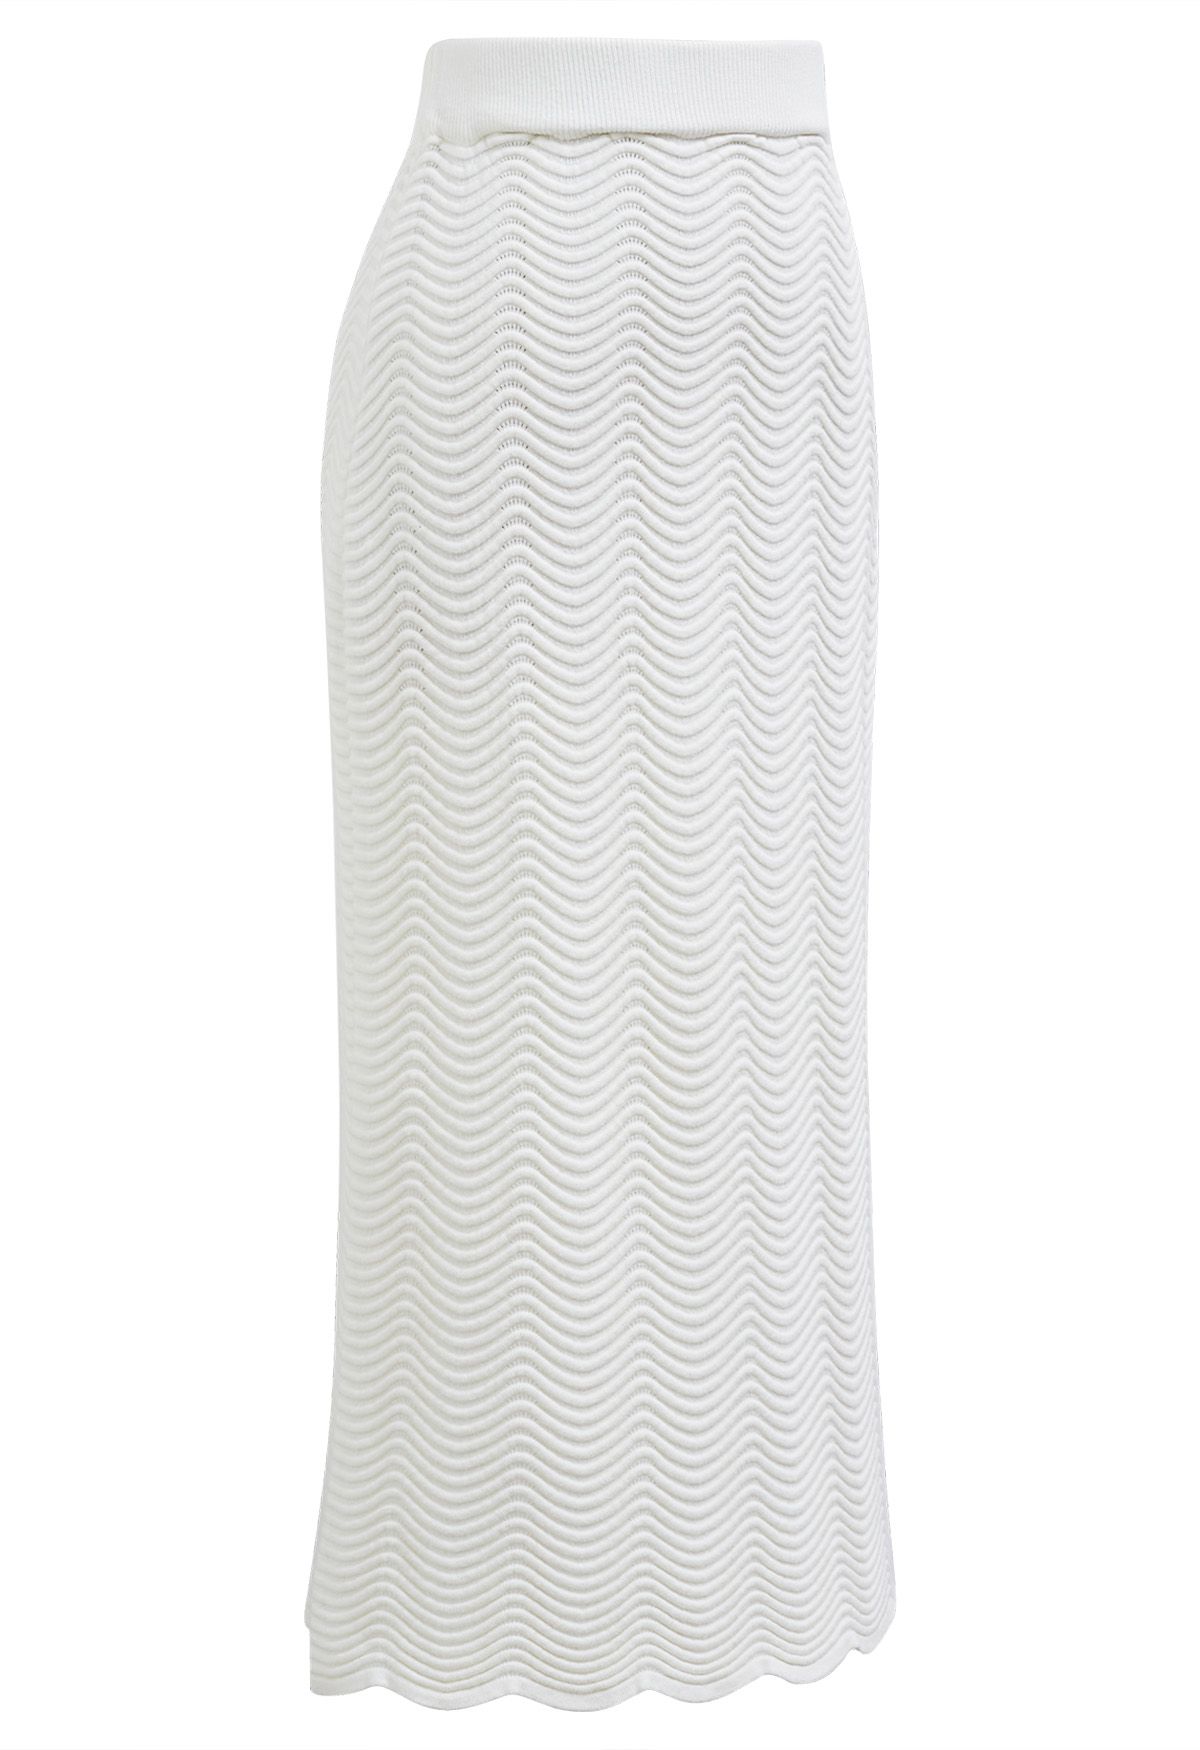 Embossed Wavy Texture Knit Pencil Skirt in Ivory - Retro, Indie and ...